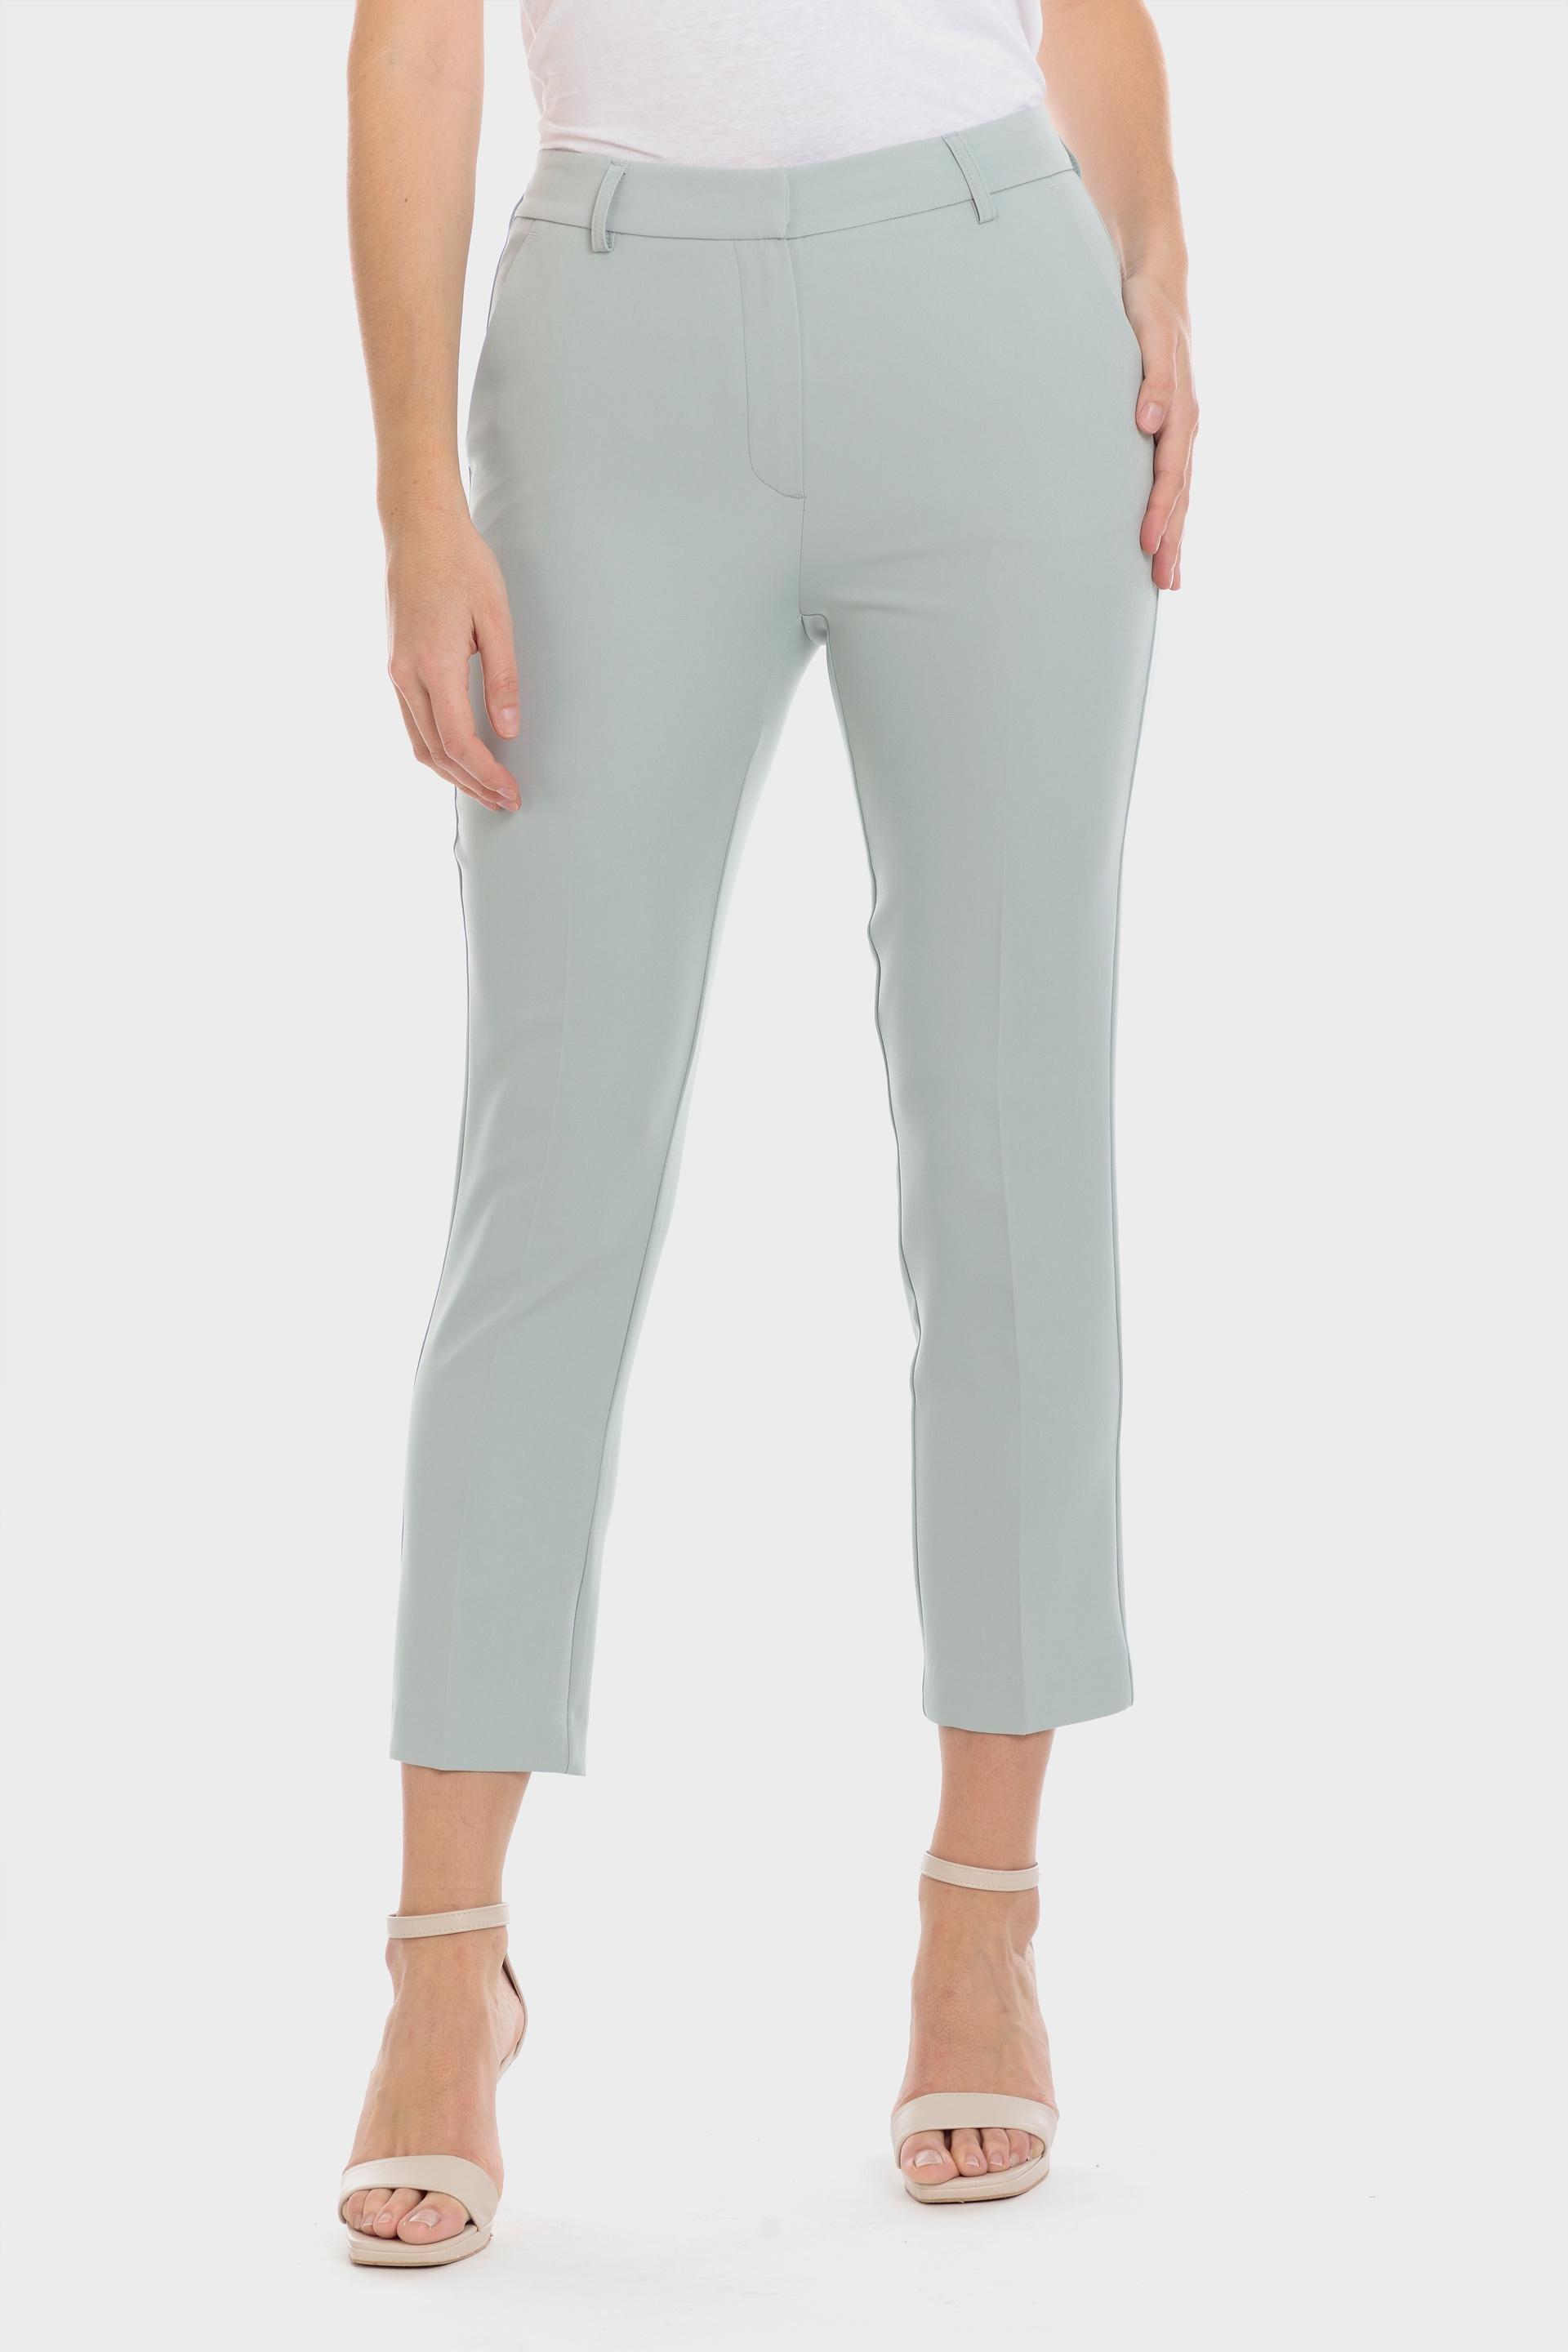 Punt Roma - Green Straight Fit Trousers